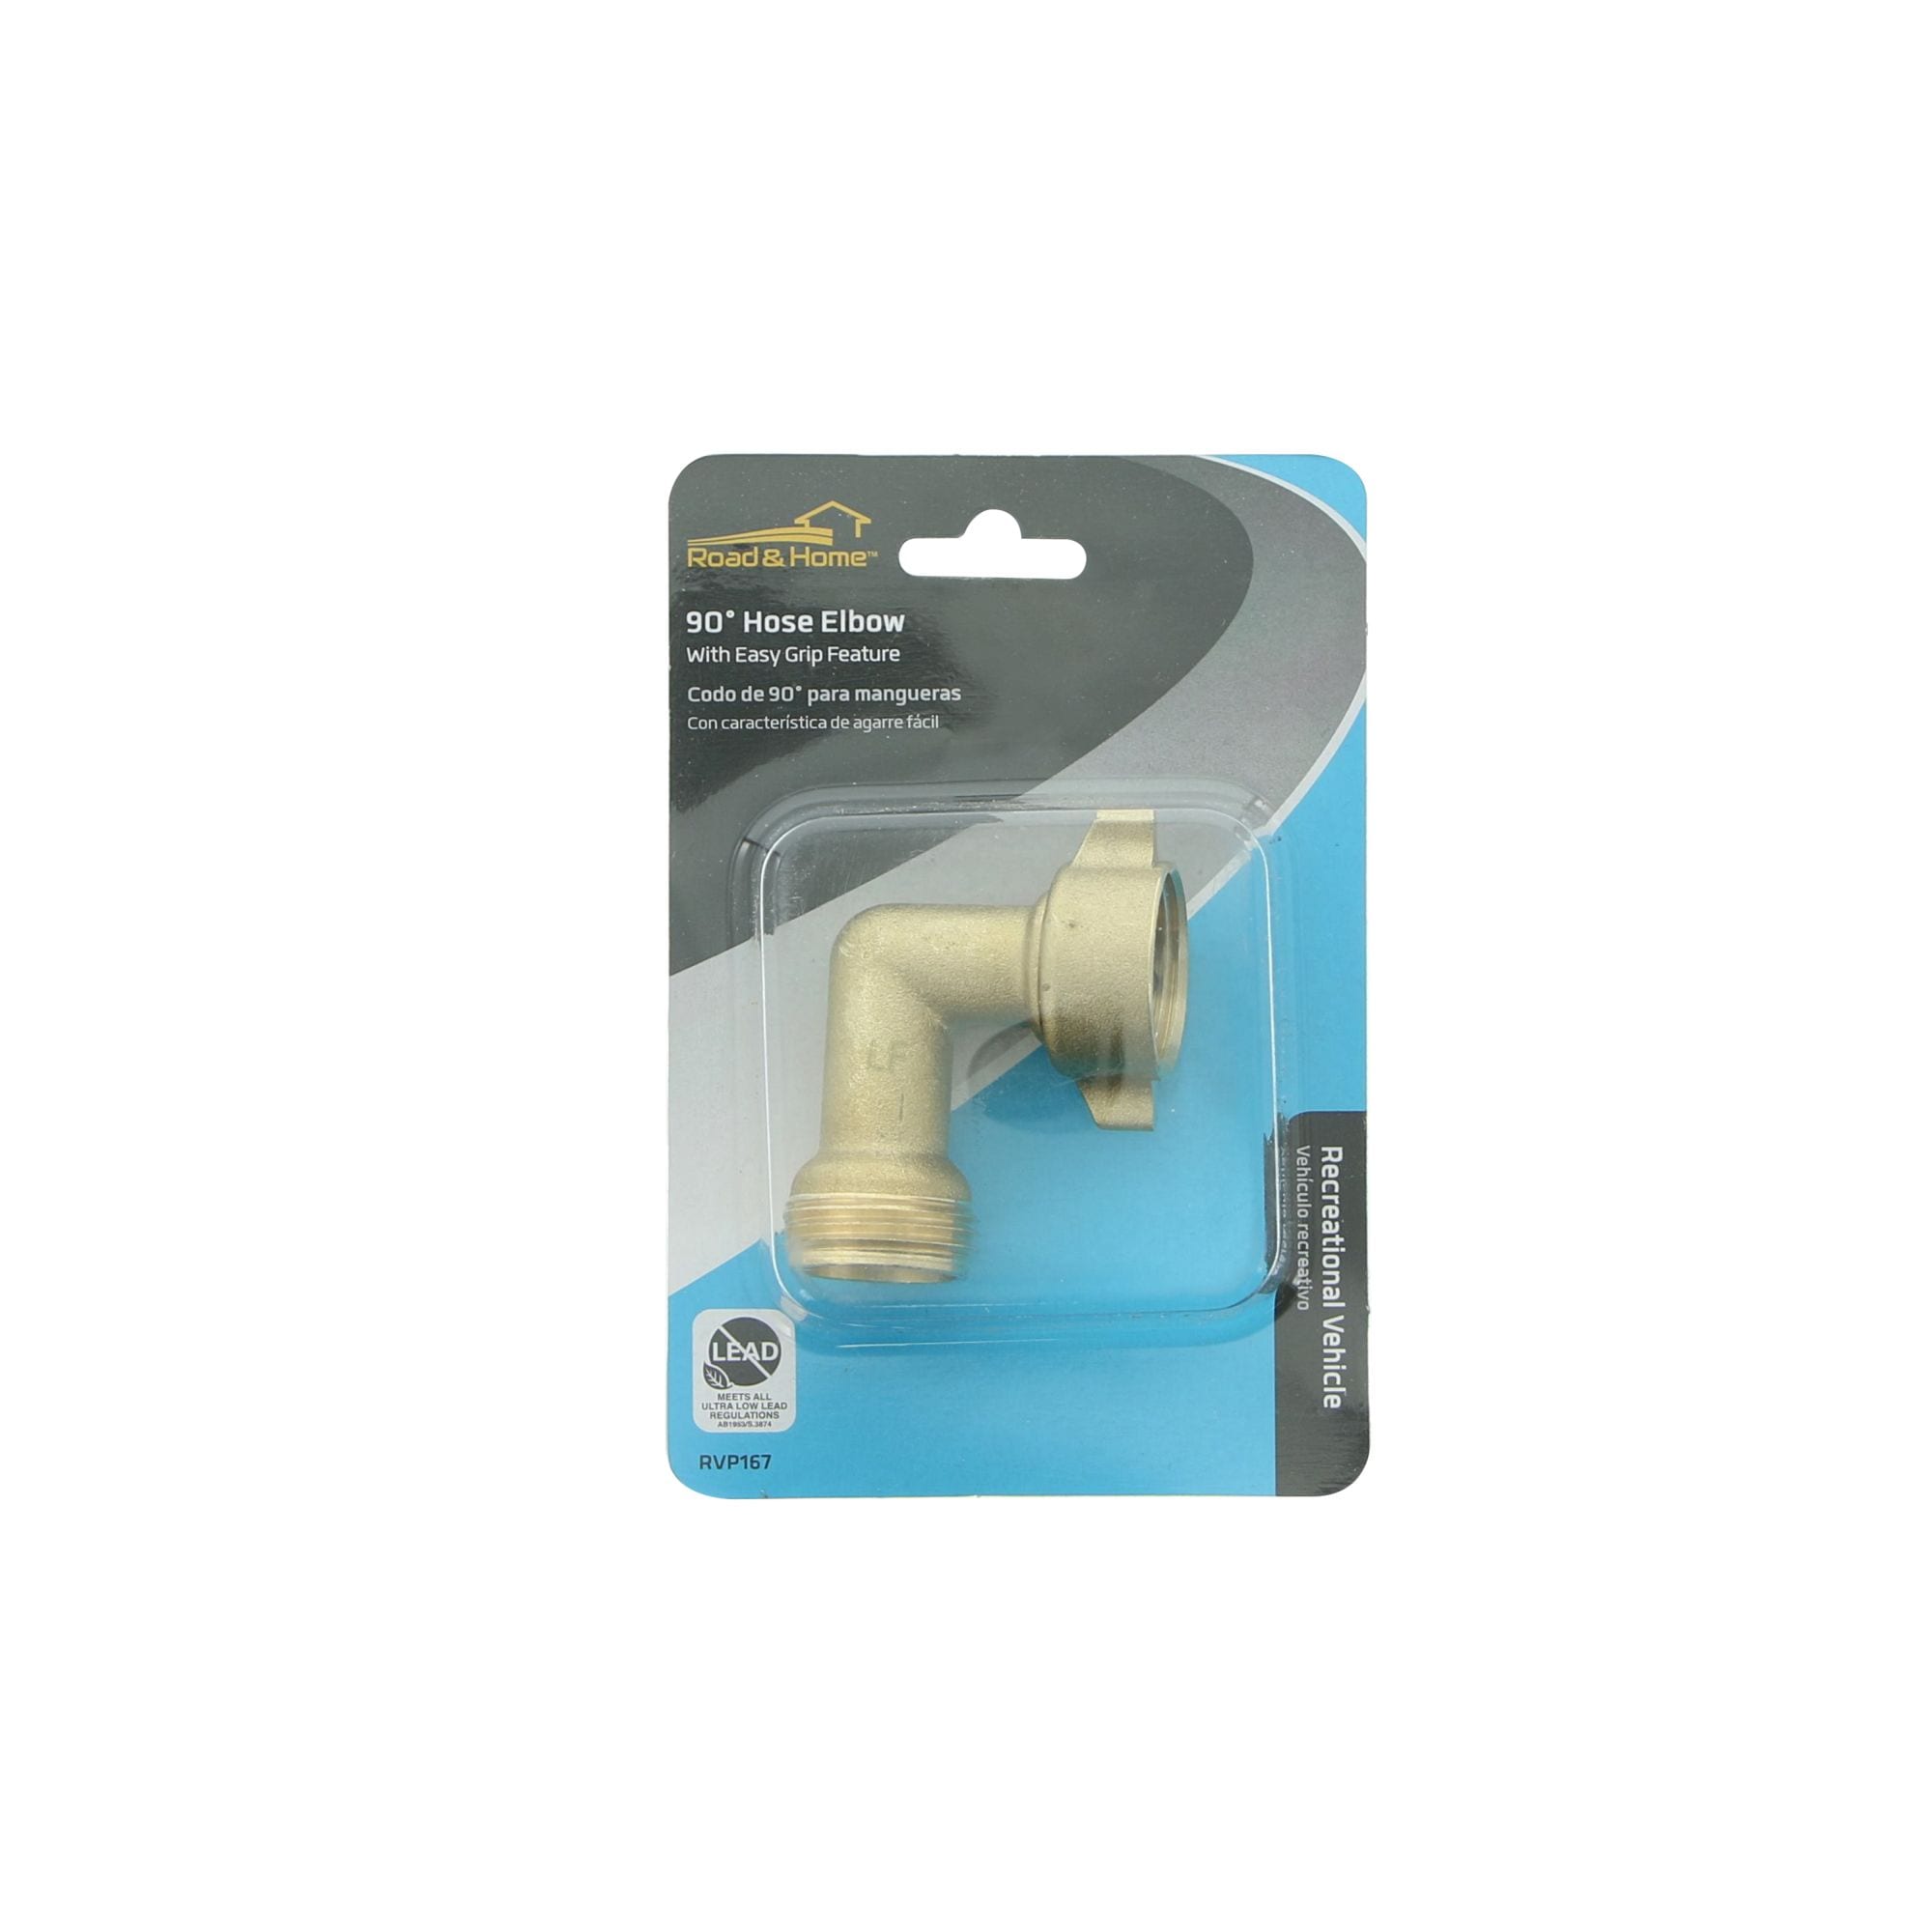 Road & Home 90 Degree Elbow for Outdoor Use Fits Standard Garden